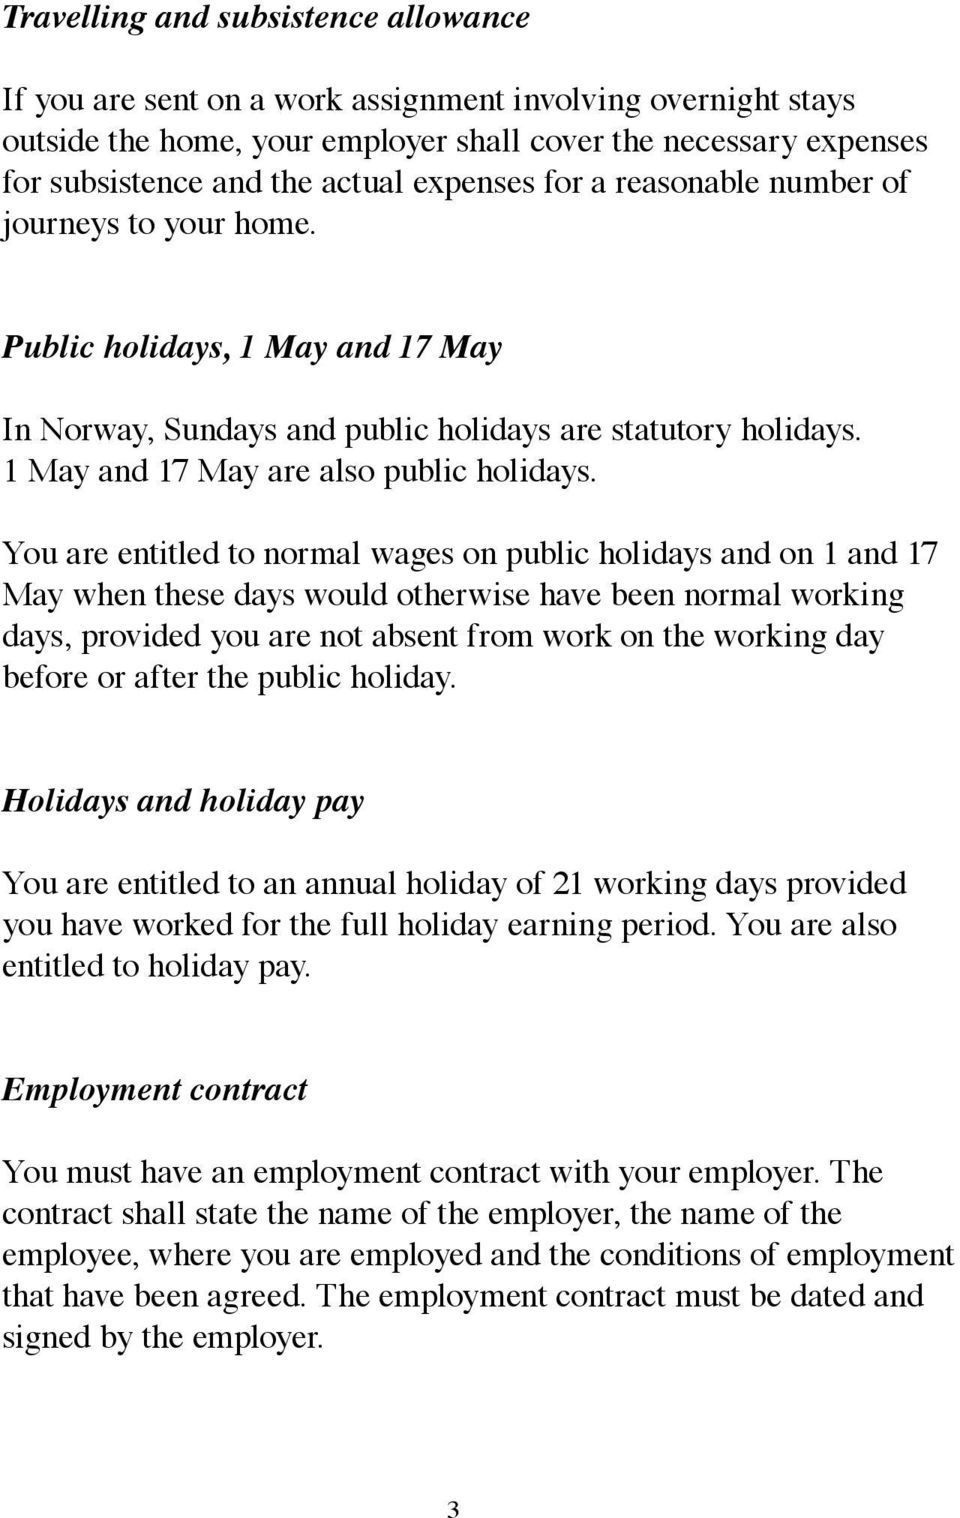 You are entitled to normal wages on public holidays and on 1 and 17 May when these days would otherwise have been normal working days, provided you are not absent from work on the working day before